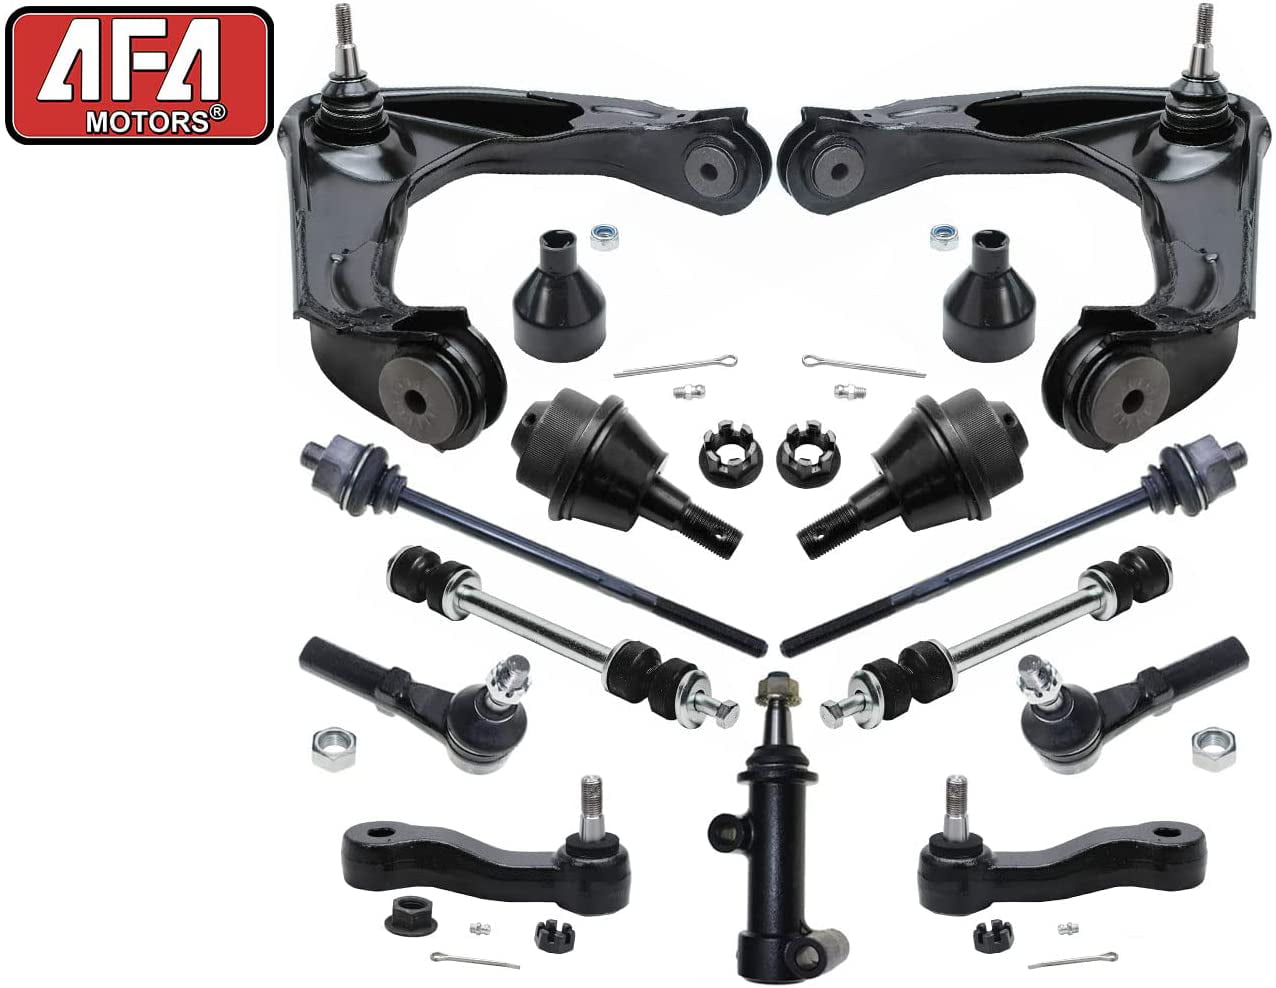 New Front Upper Control Arm Sway Bar Link Kit For Chevy Silverado 1500hd 2500hd